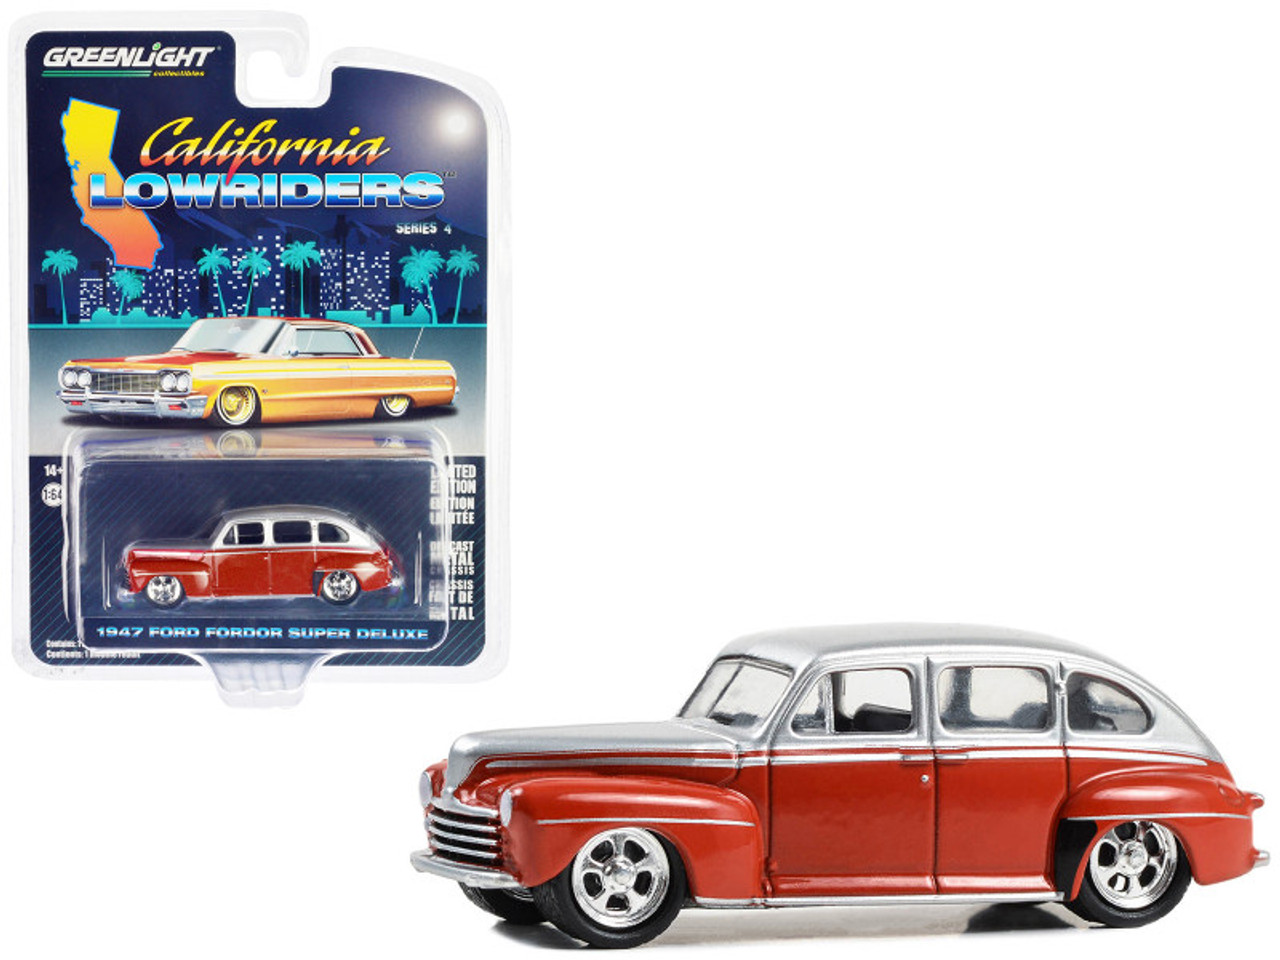 1947 Ford Fordor Super Deluxe Lowrider Red and Silver Metallic "California Lowriders" Series 4 1/64 Diecast Model Car by Greenlight